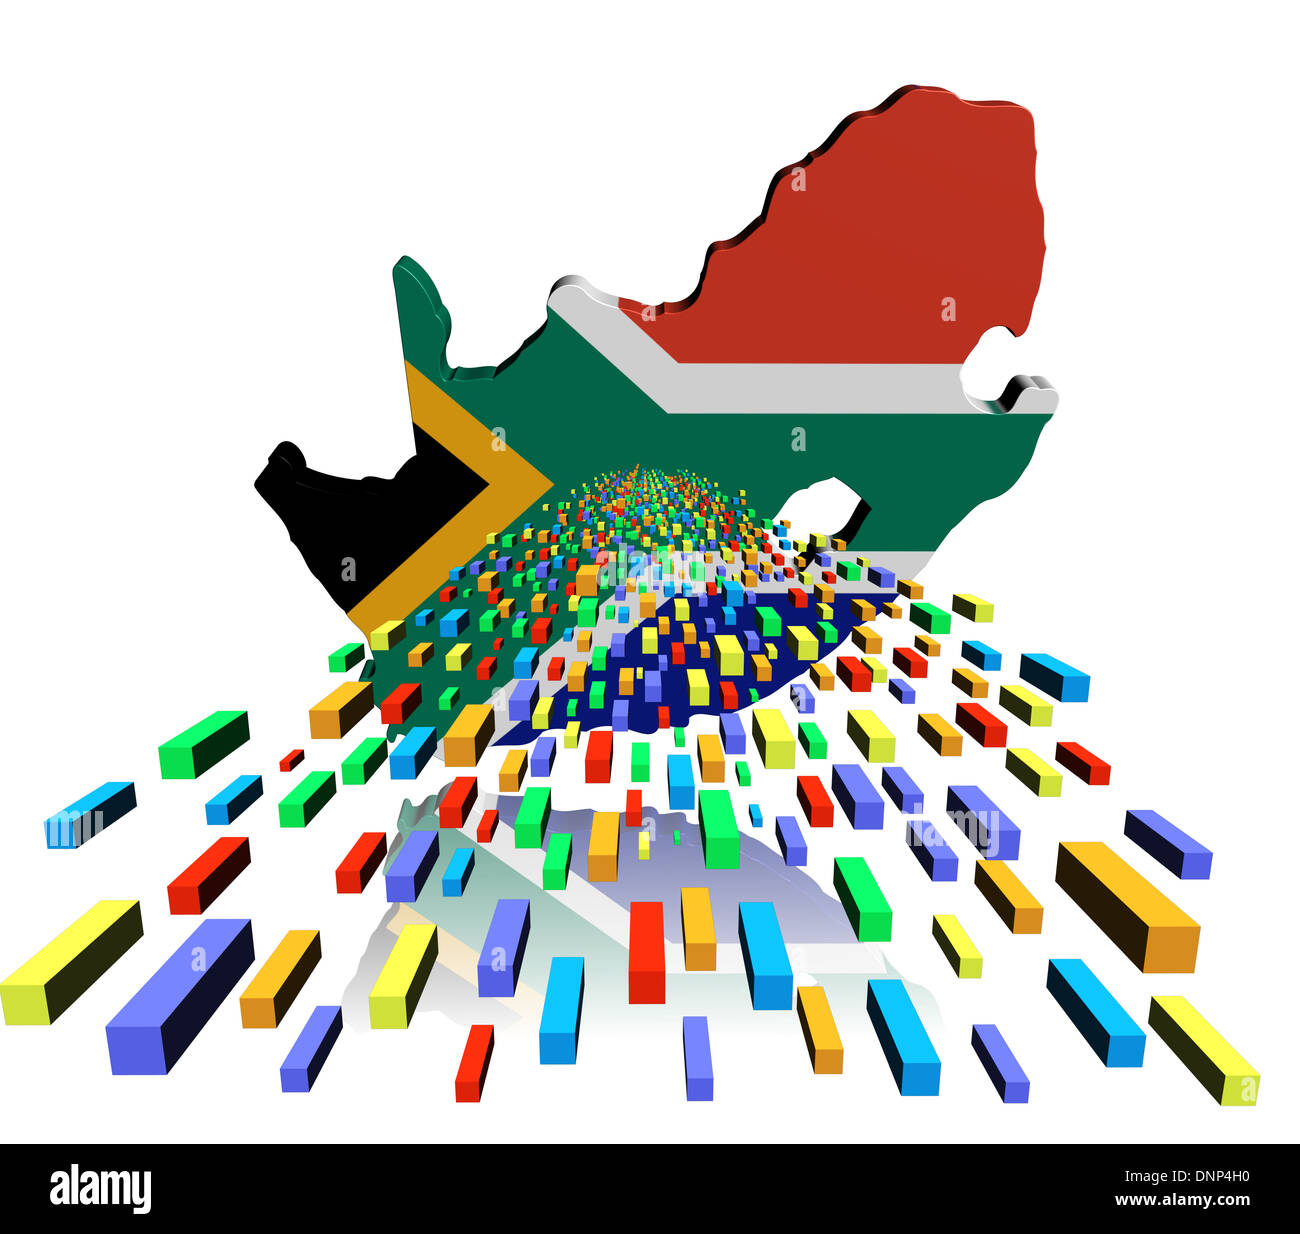 South Africa map flag reflected with containers illustration Stock Photo